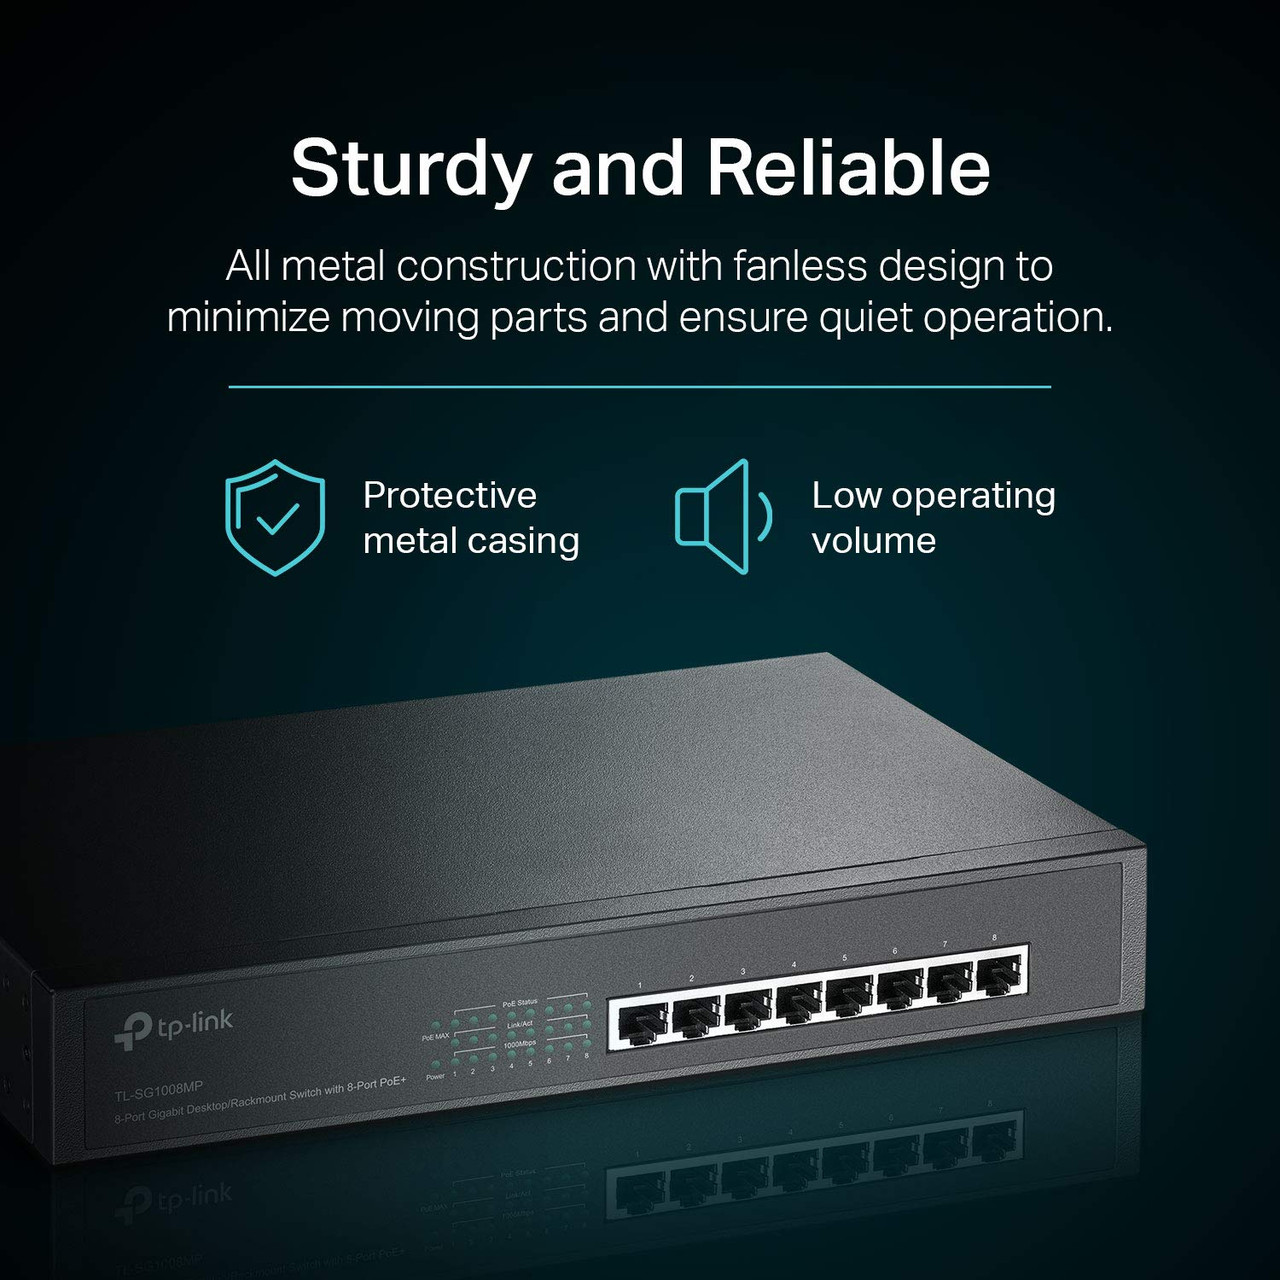 TP-Link TL-SG1008MP 8 Port Gigabit PoE Switch 8 PoE+ Ports @153W Rackmount Plug & Play Sturdy Metal Shielded Ports Overload Protection w/ Port Priority